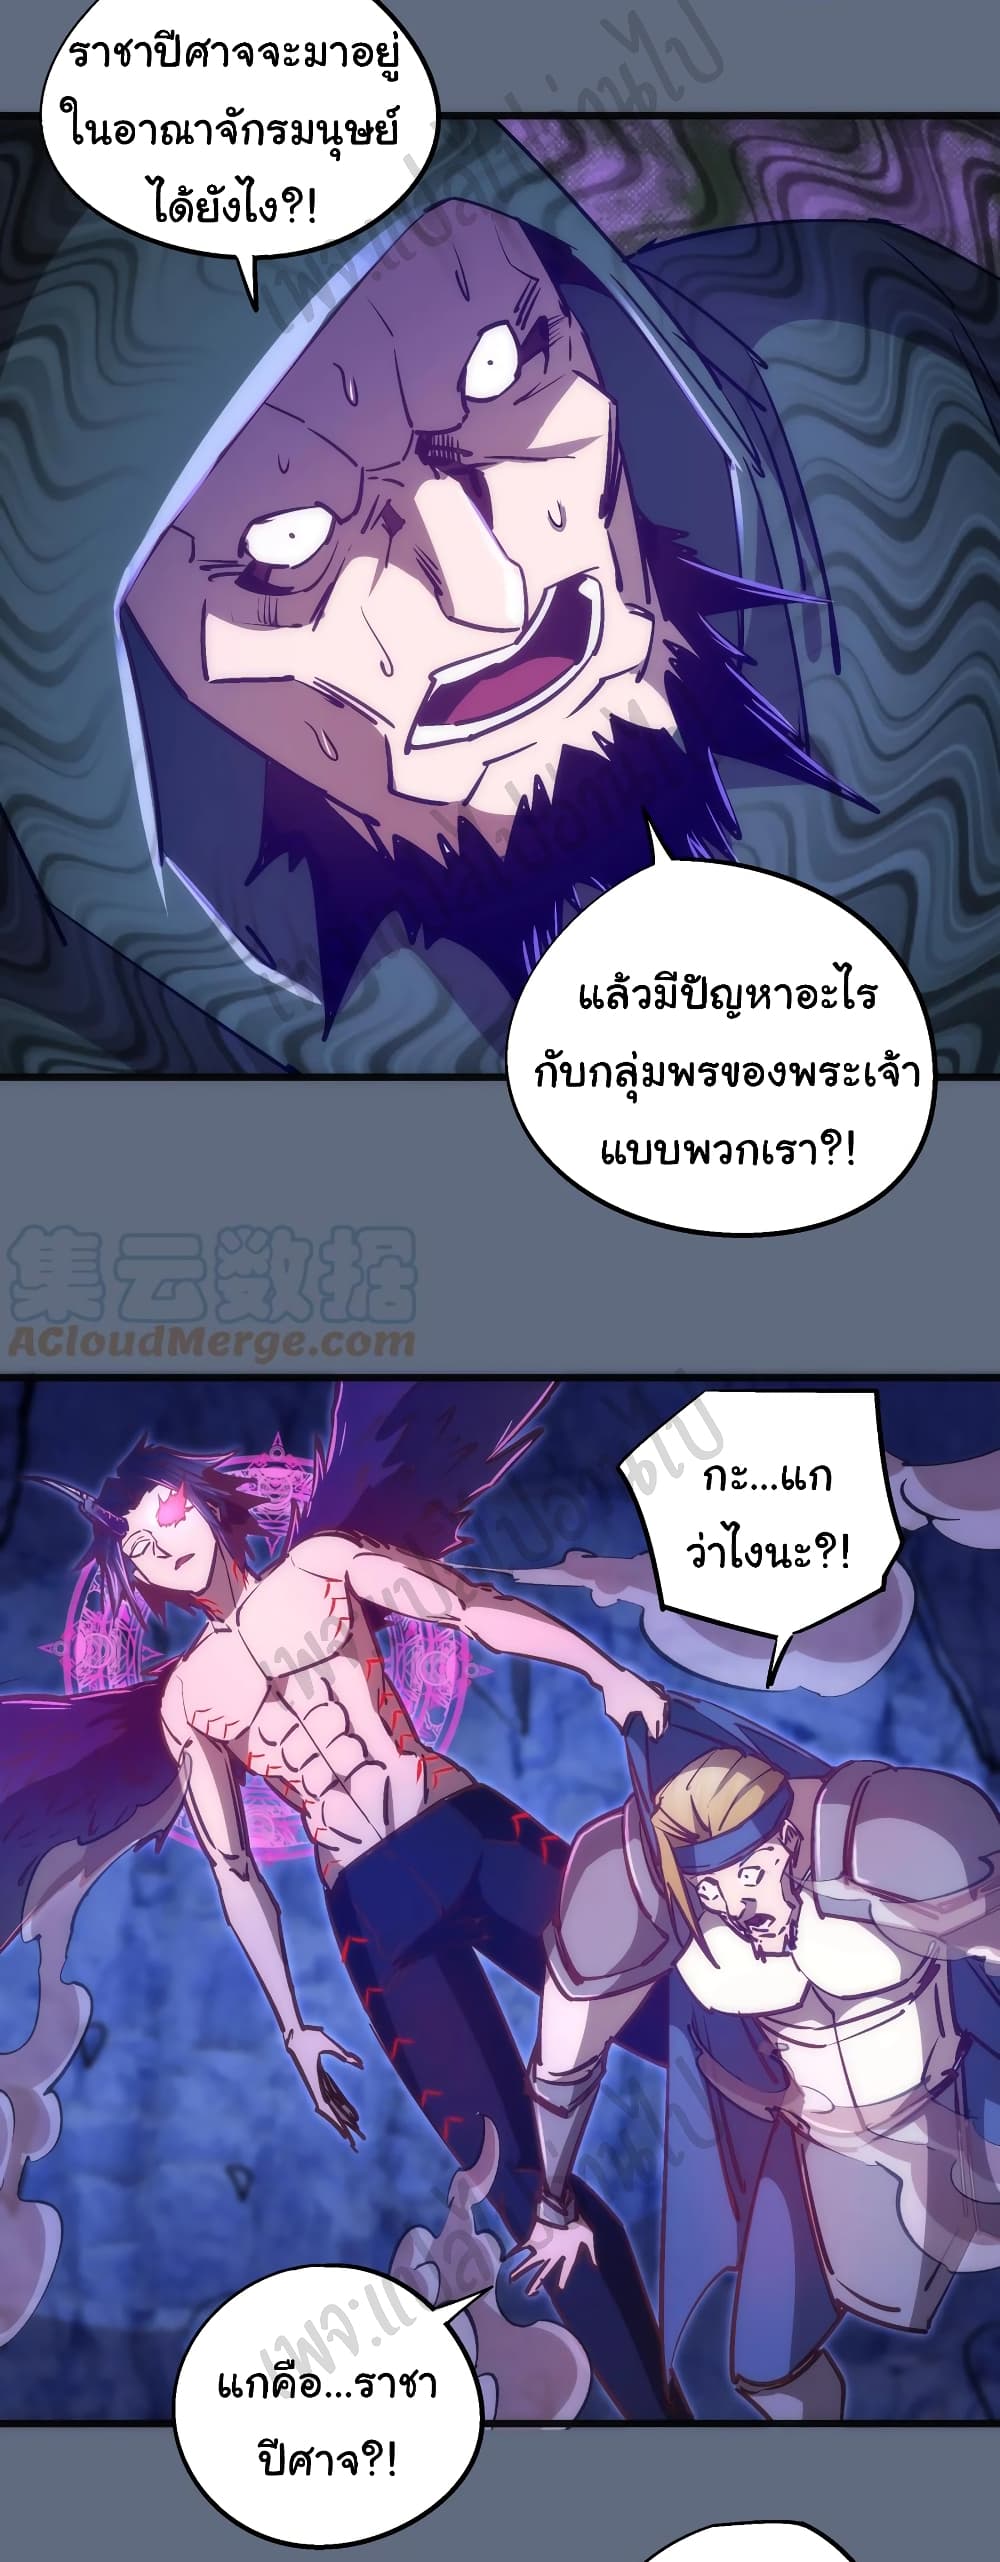 I’m Not the Overlord! - หน้า 3